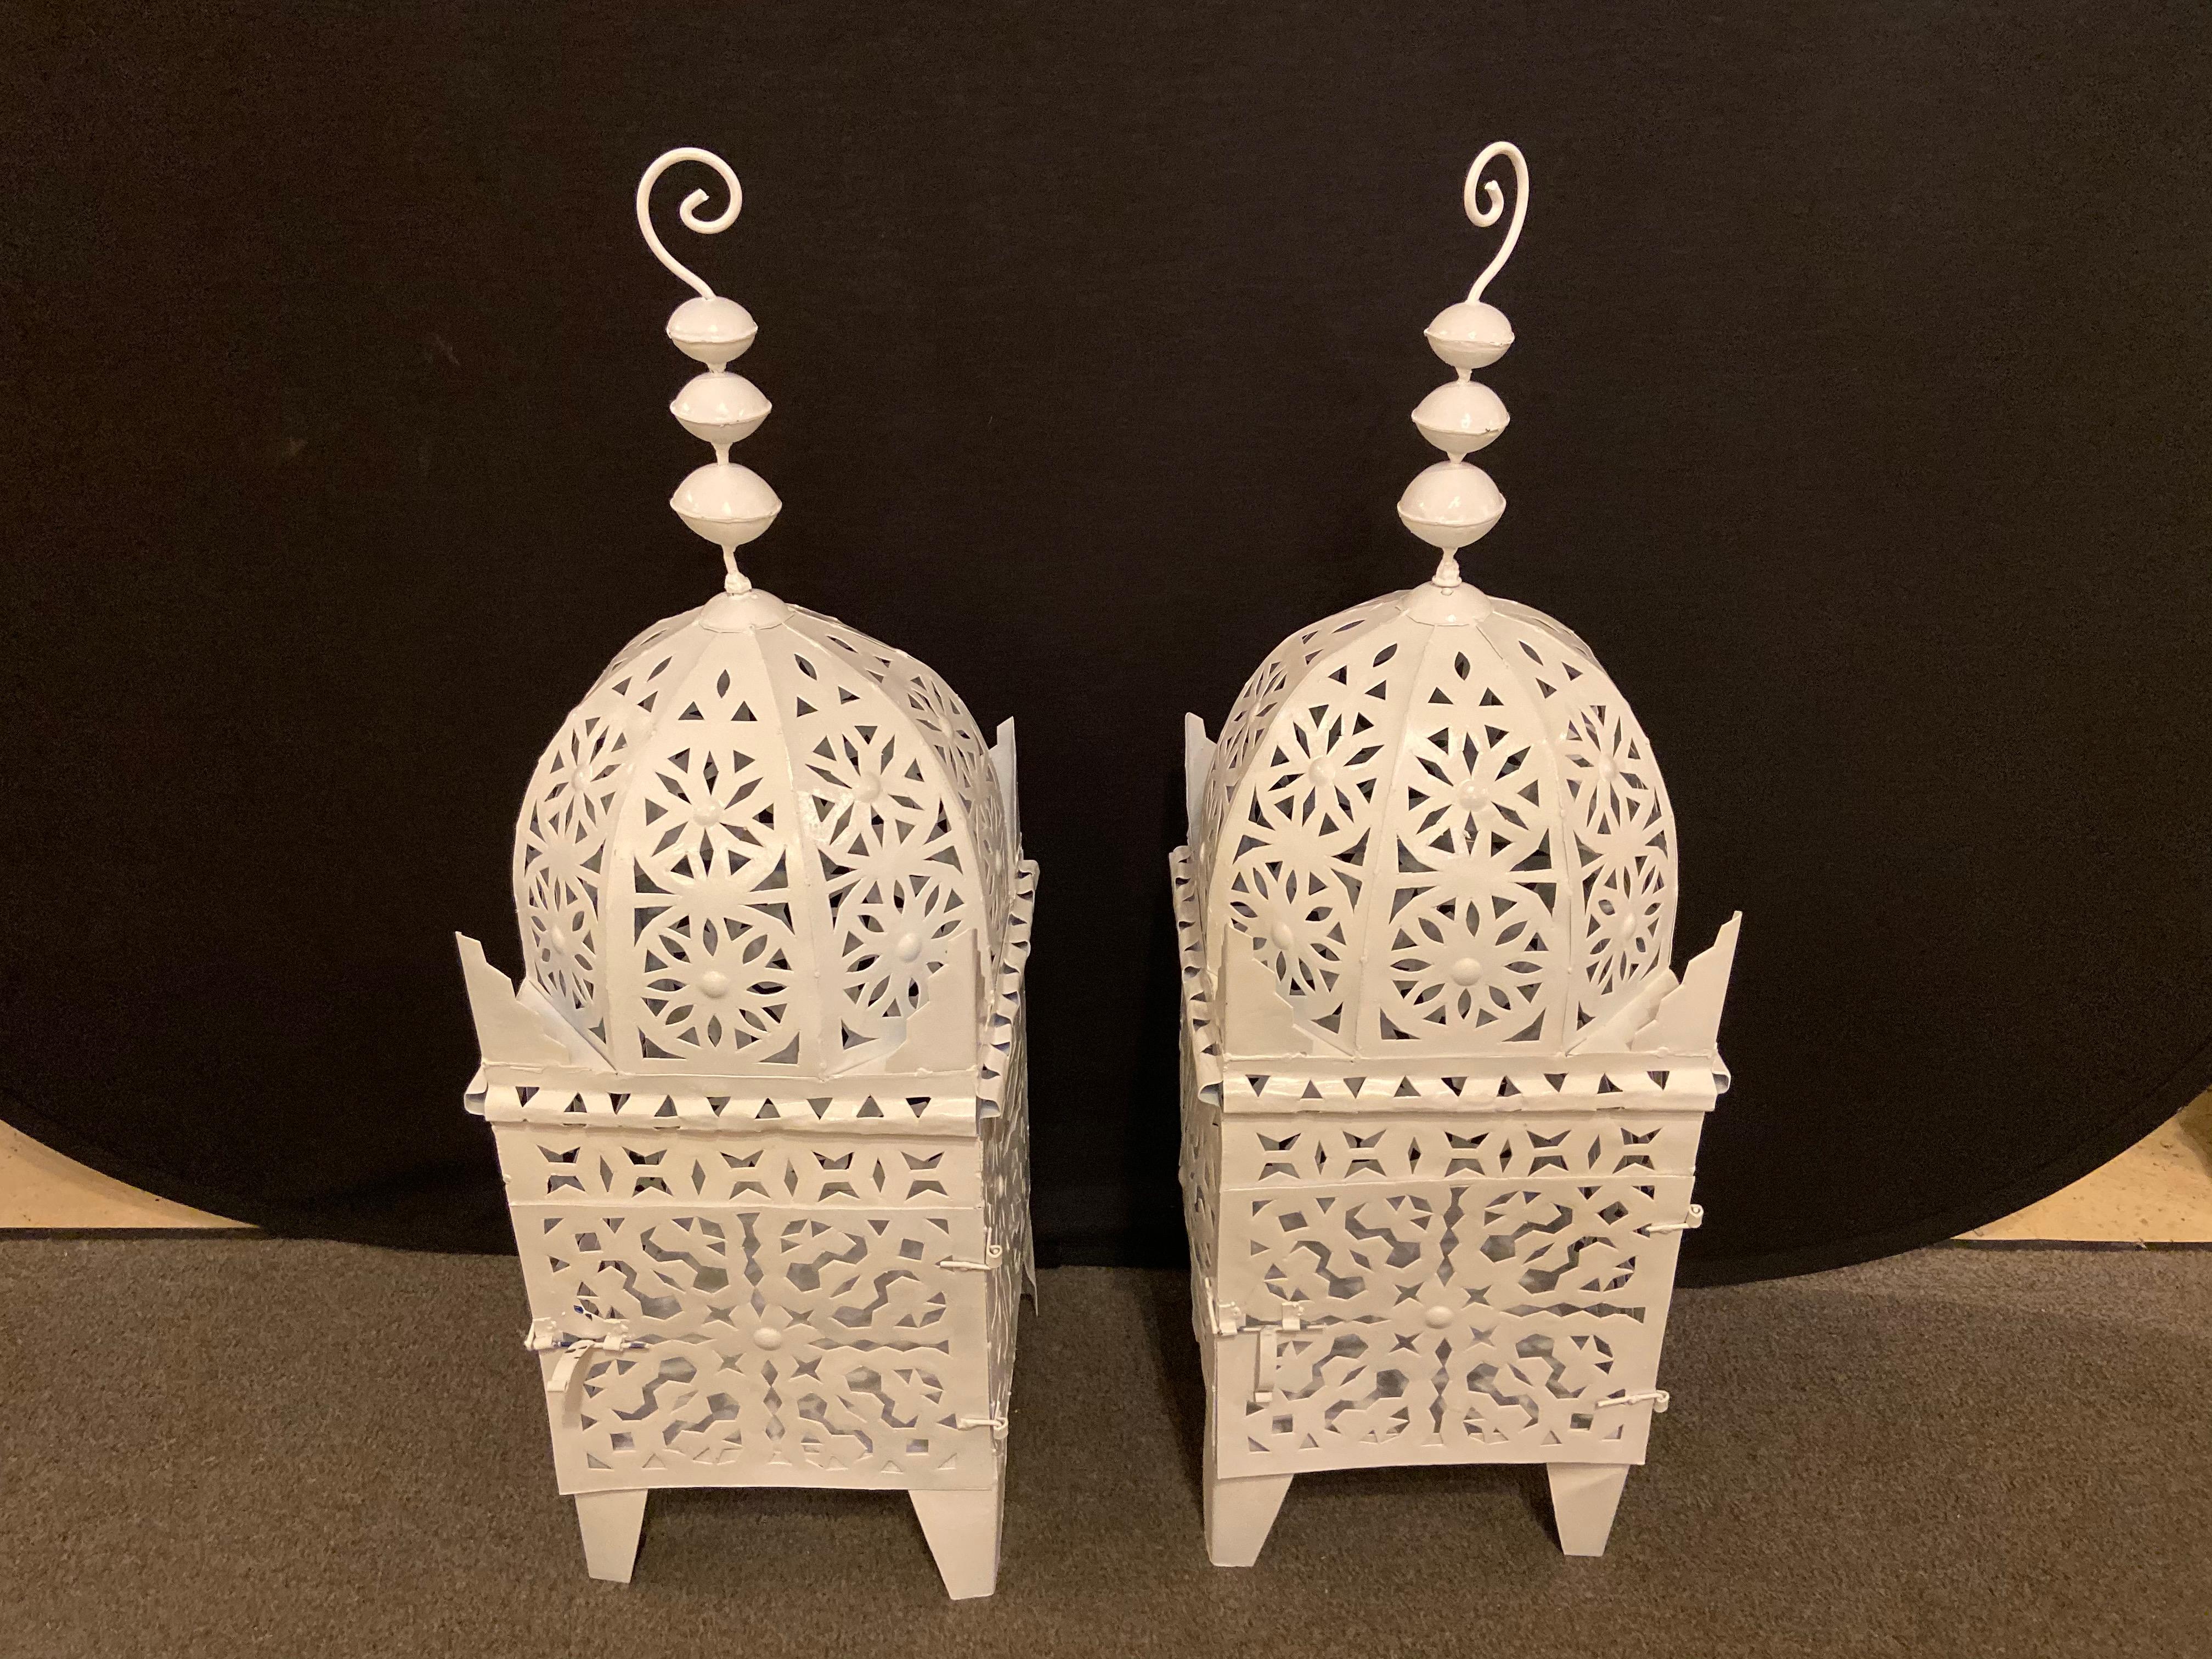 Garden floor lantern or candleholder in white, a pair

The pair of floor lanterns are hand carved of metal painted in white Majorelle inspired by Yves Saint Laurent Majorelle garden. Each lantern features a beautiful intricate design to emit soft